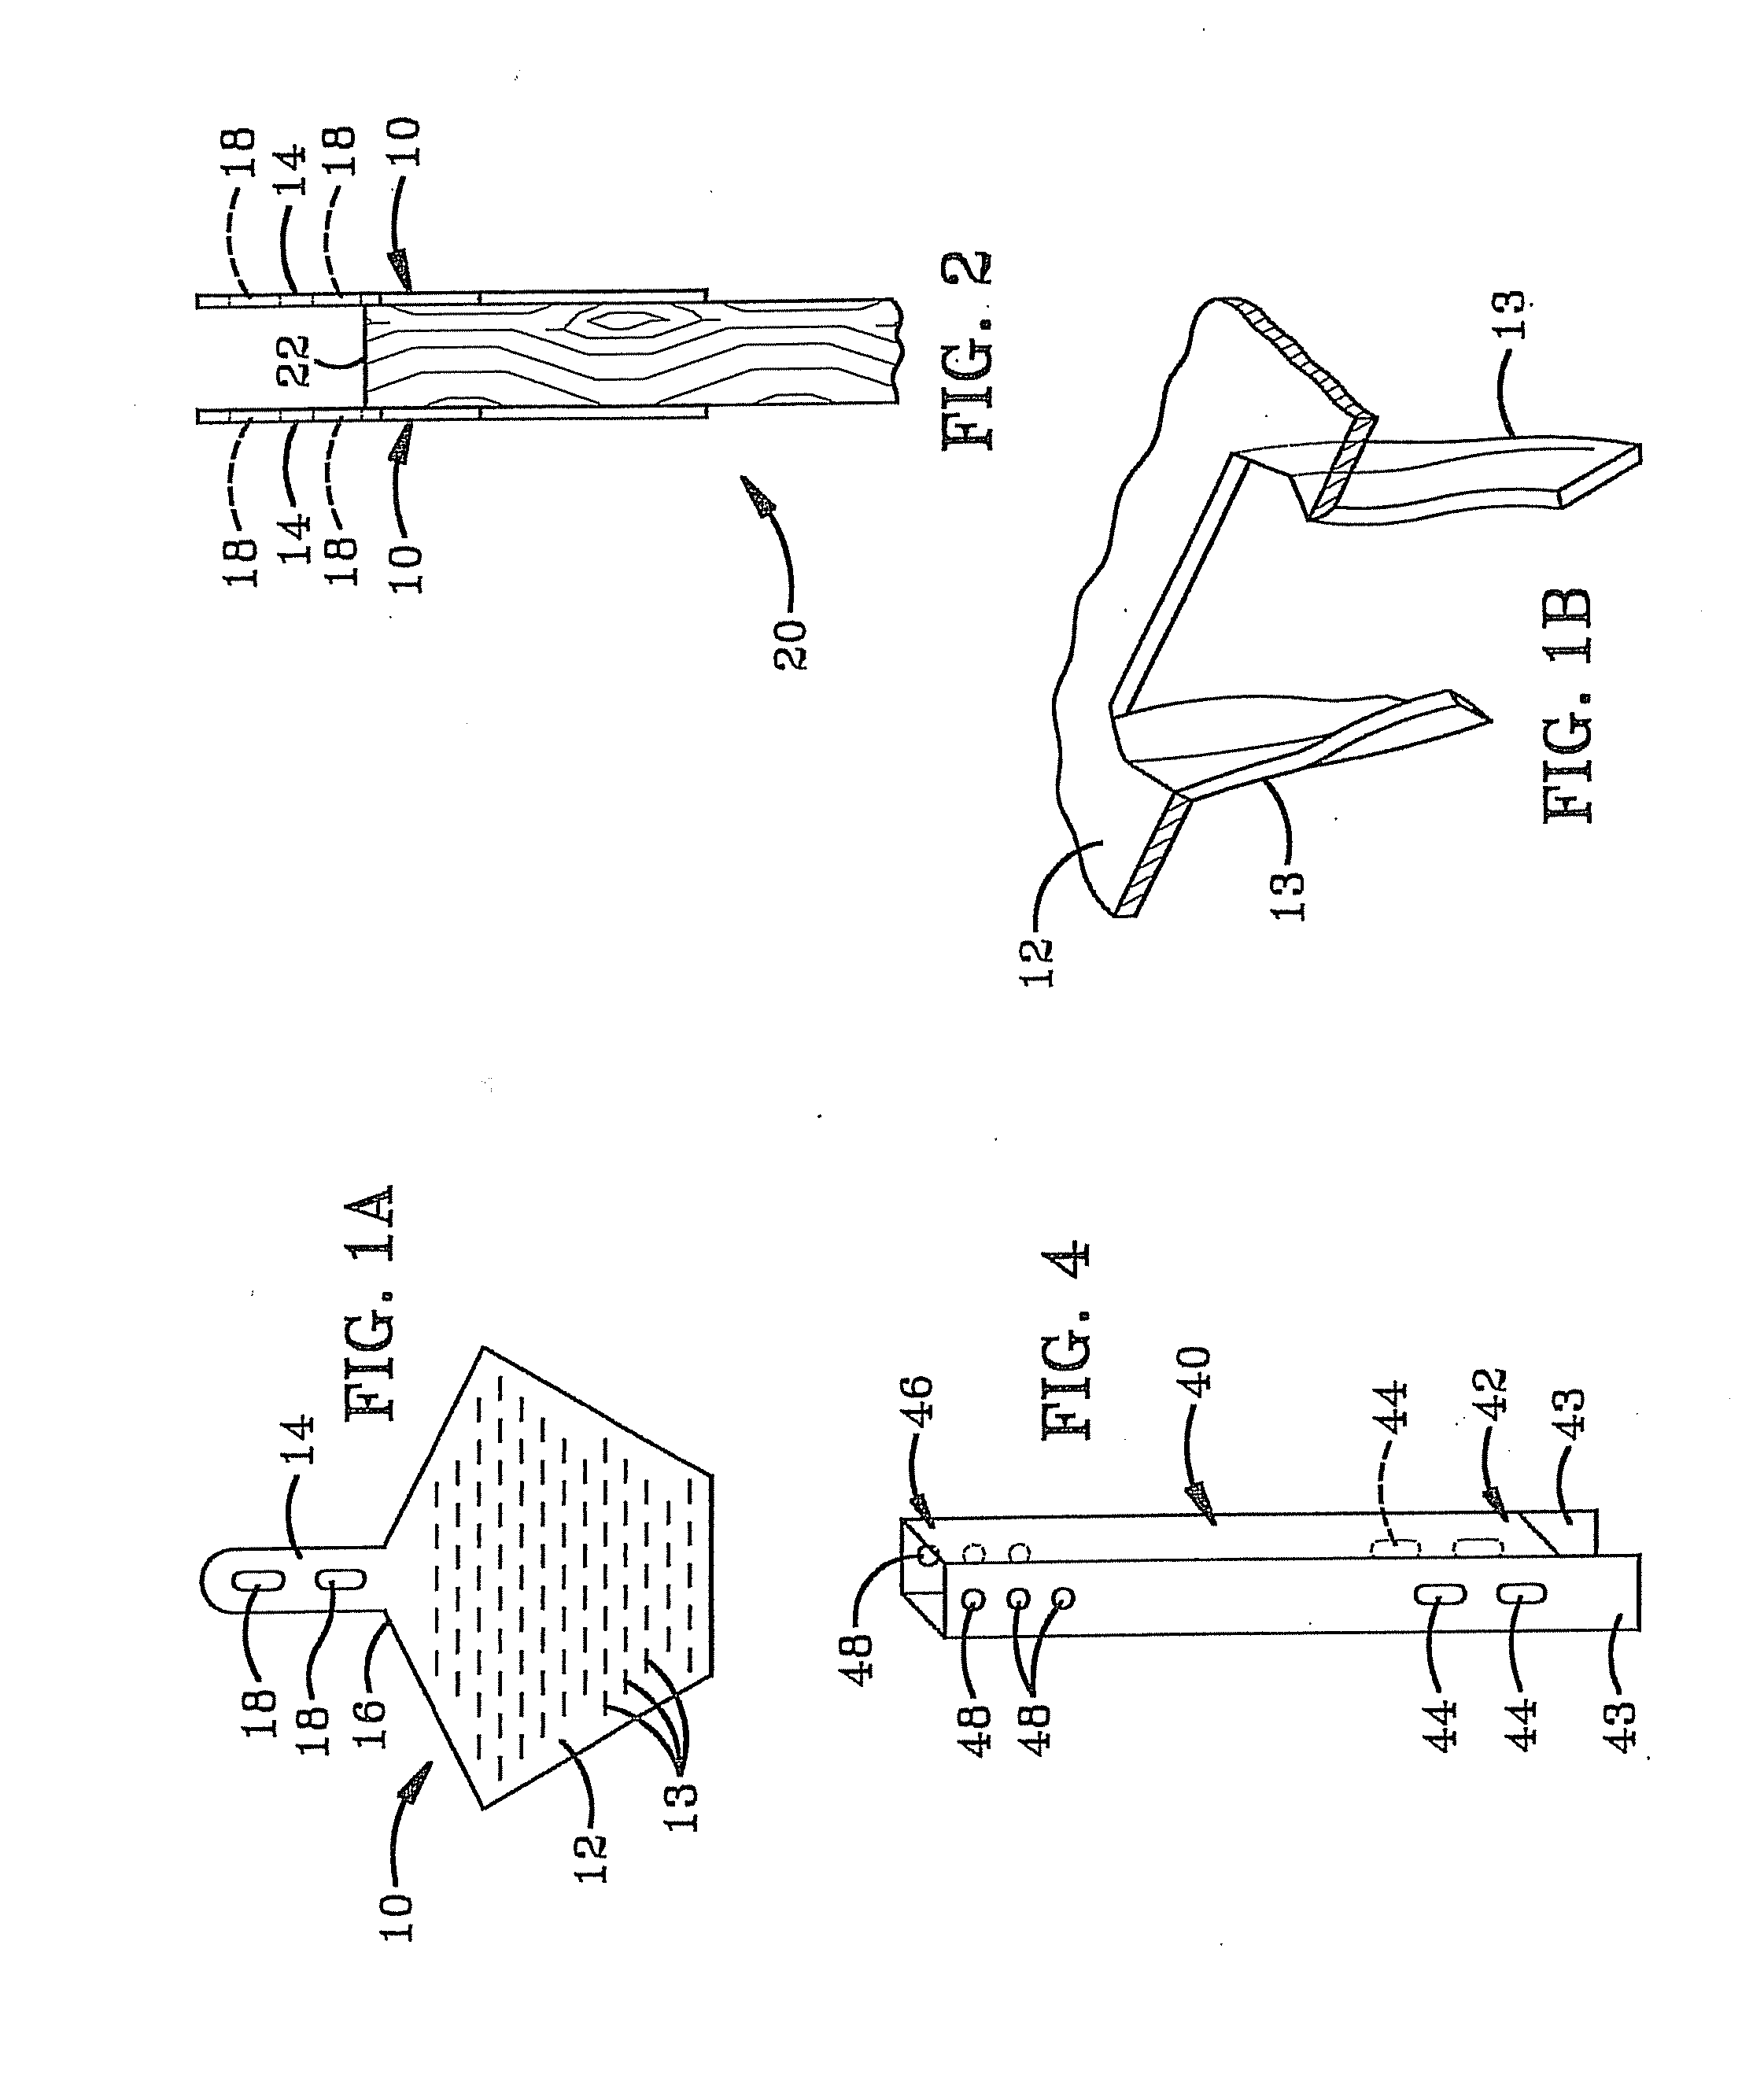 Truss gusset plate and anchor safety system